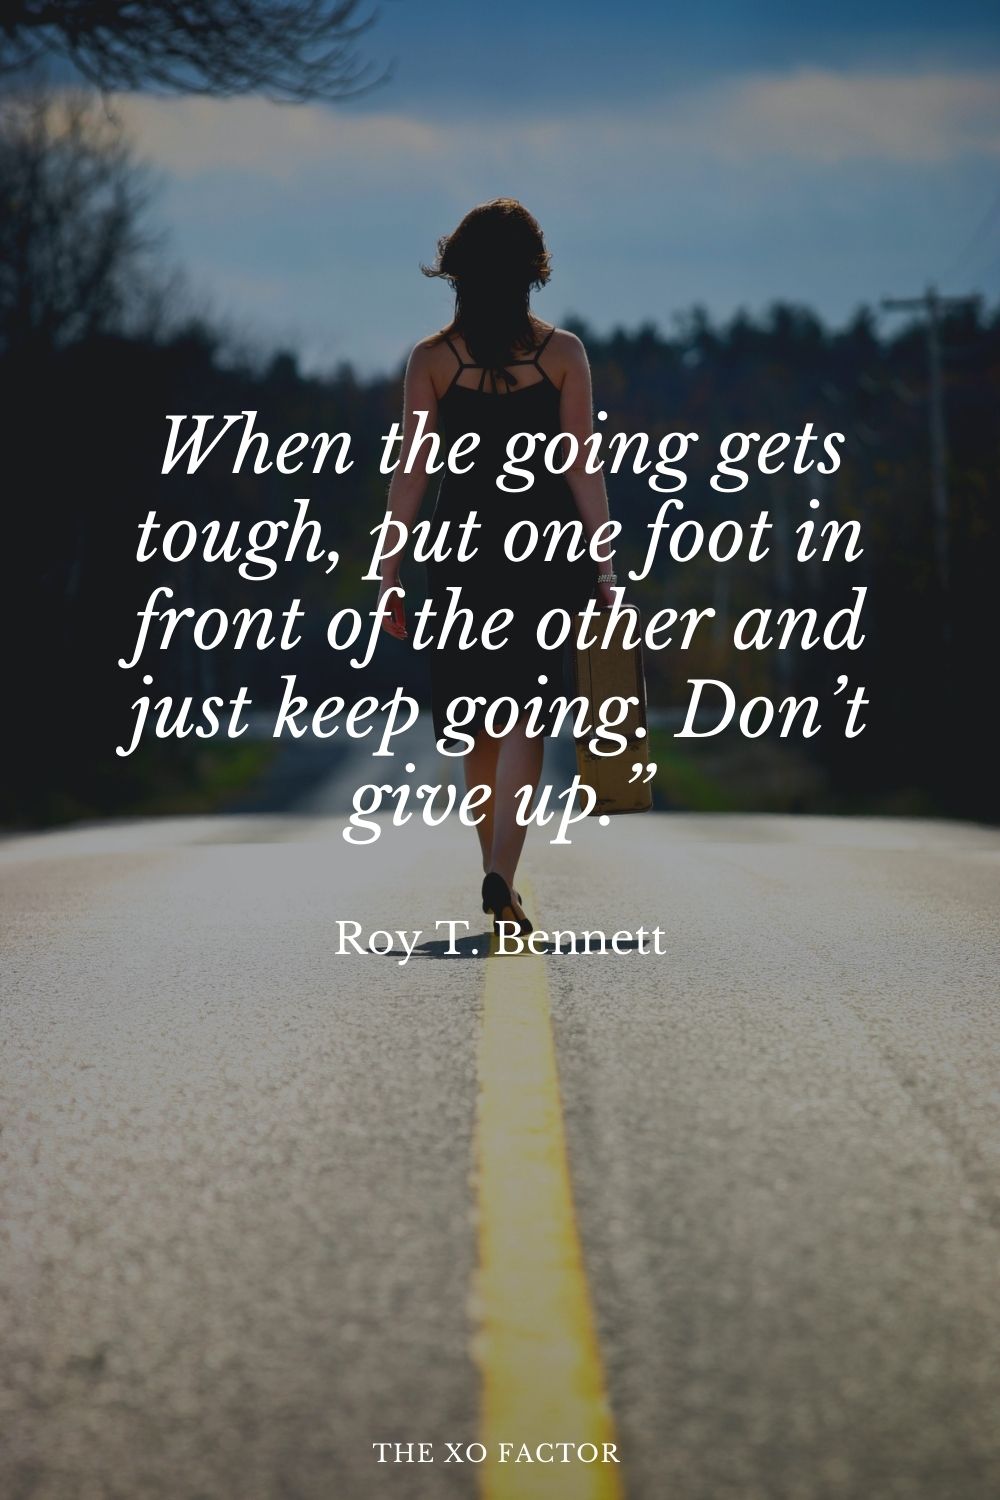 When the going gets tough, put one foot in front of the other and just keep going. Don’t give up.” Roy T. Bennett